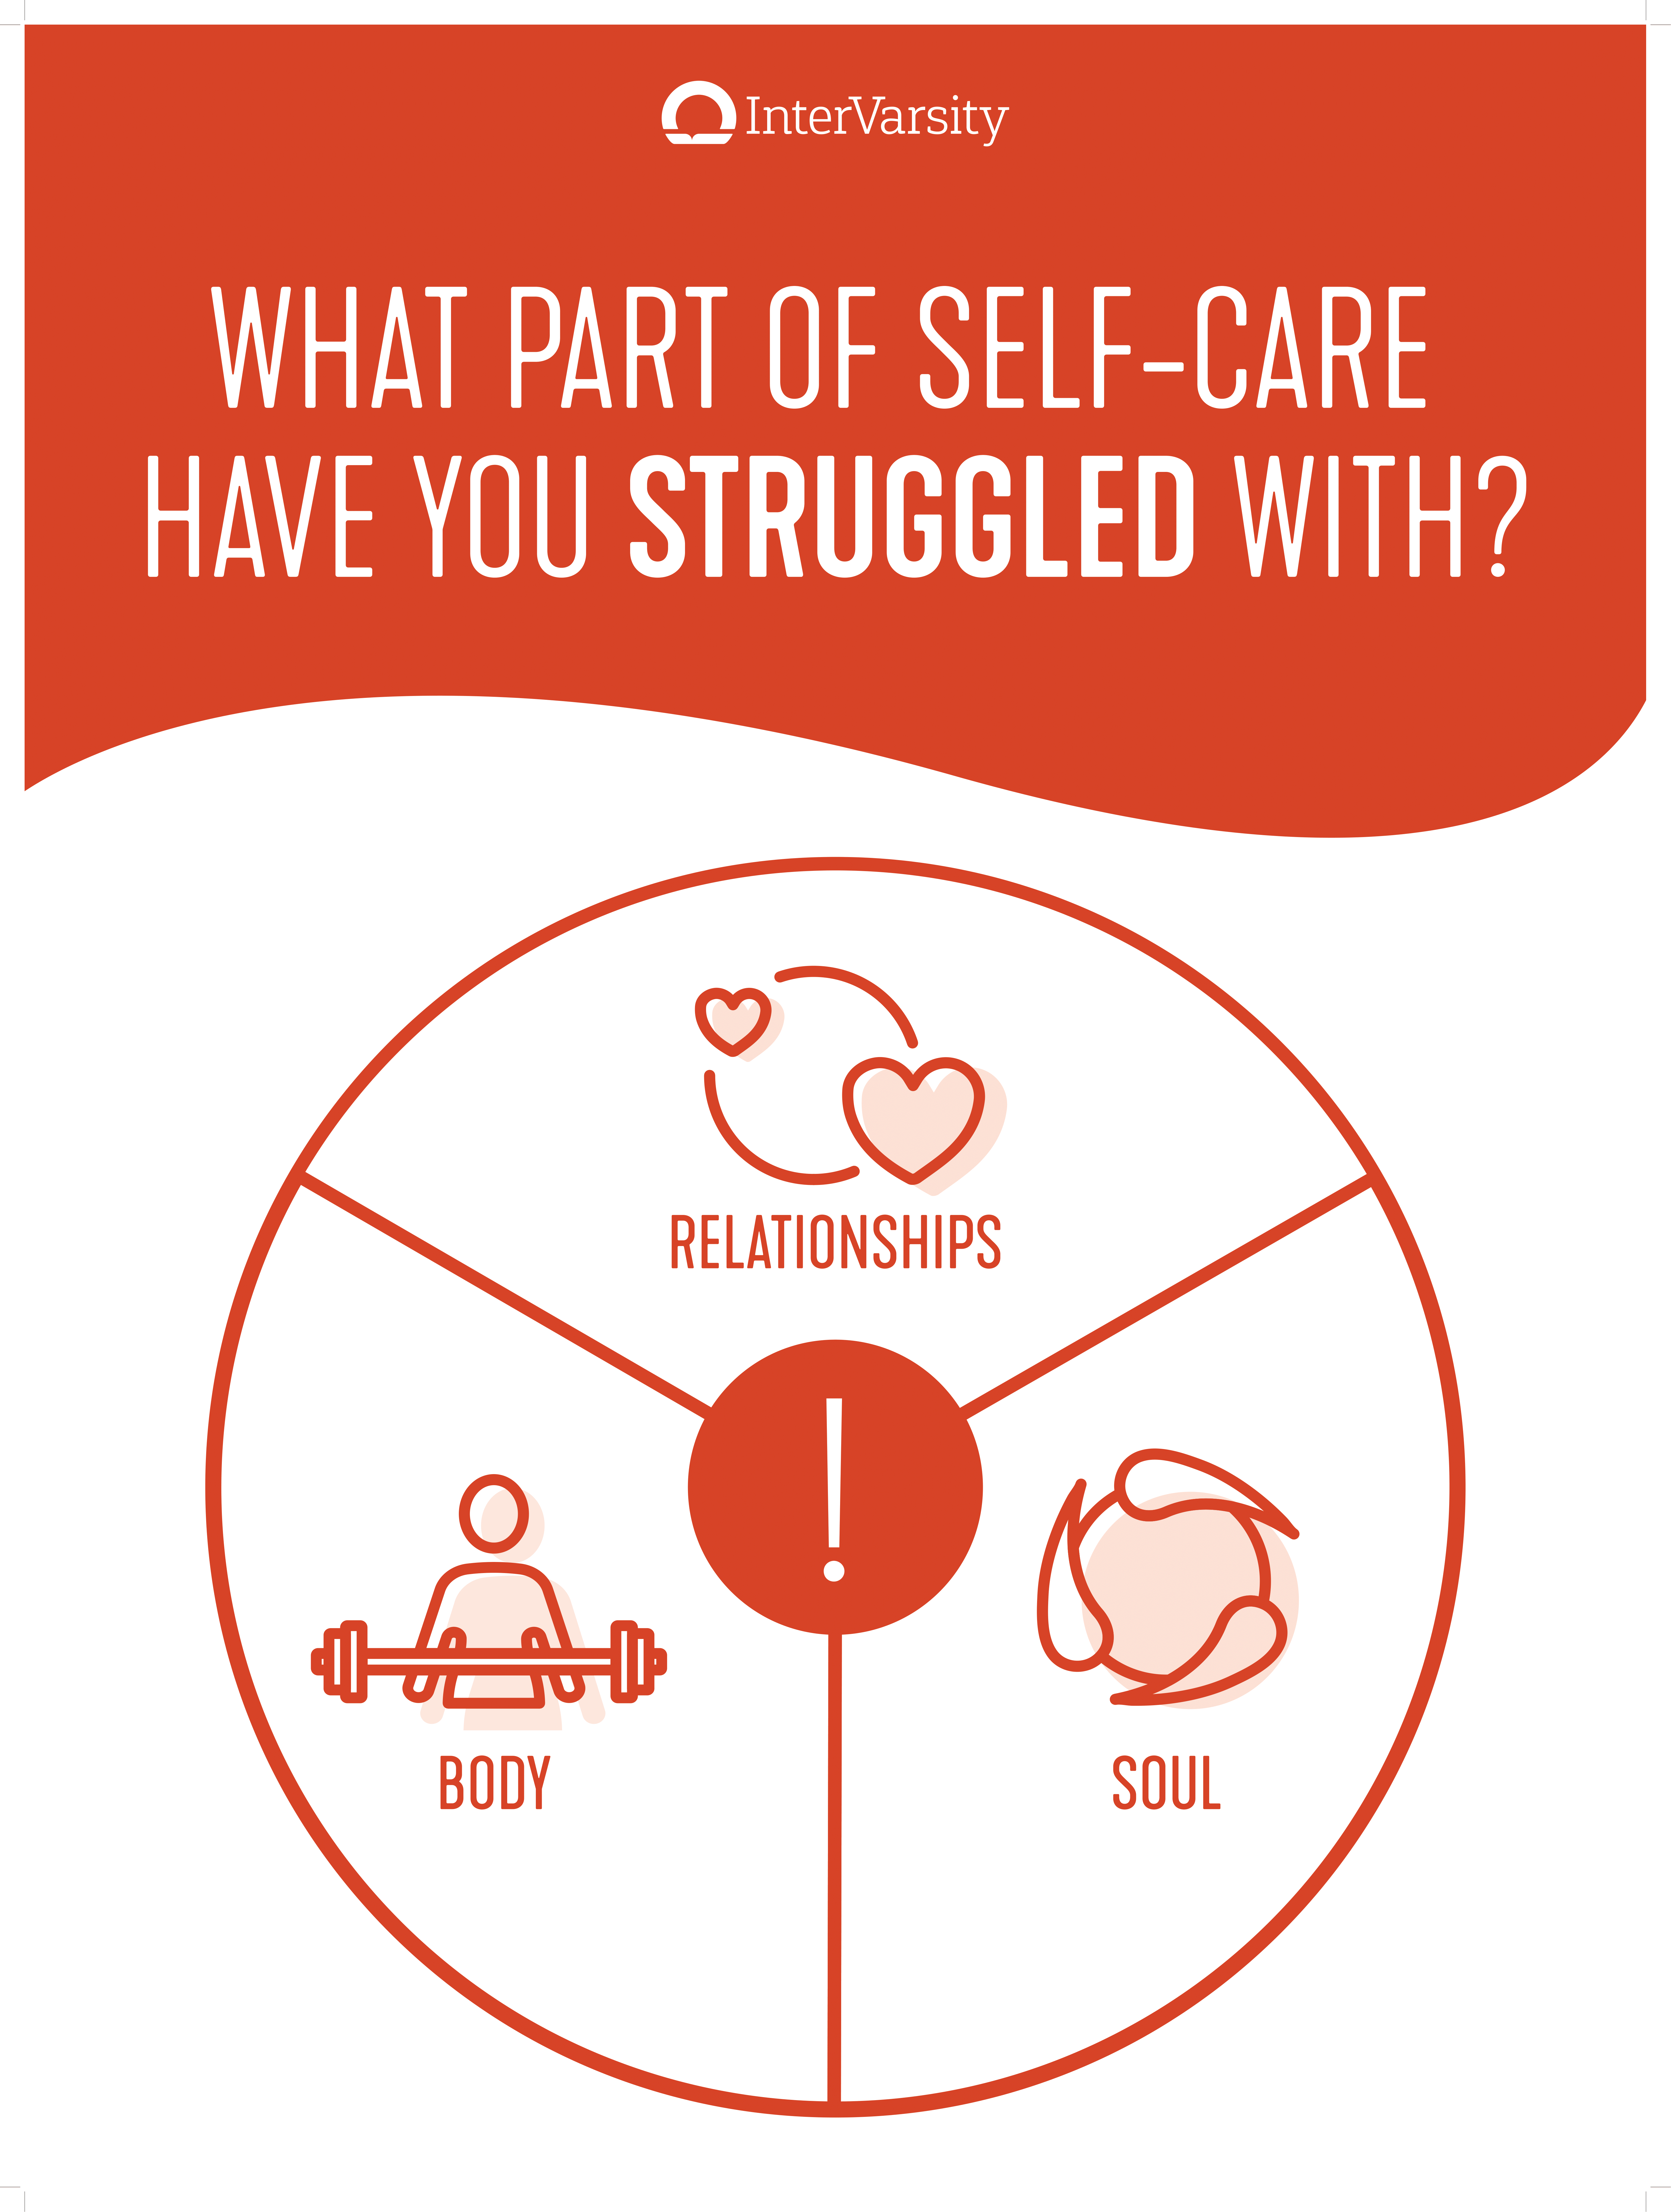 Panel 3: what part of self-care have you struggled with?